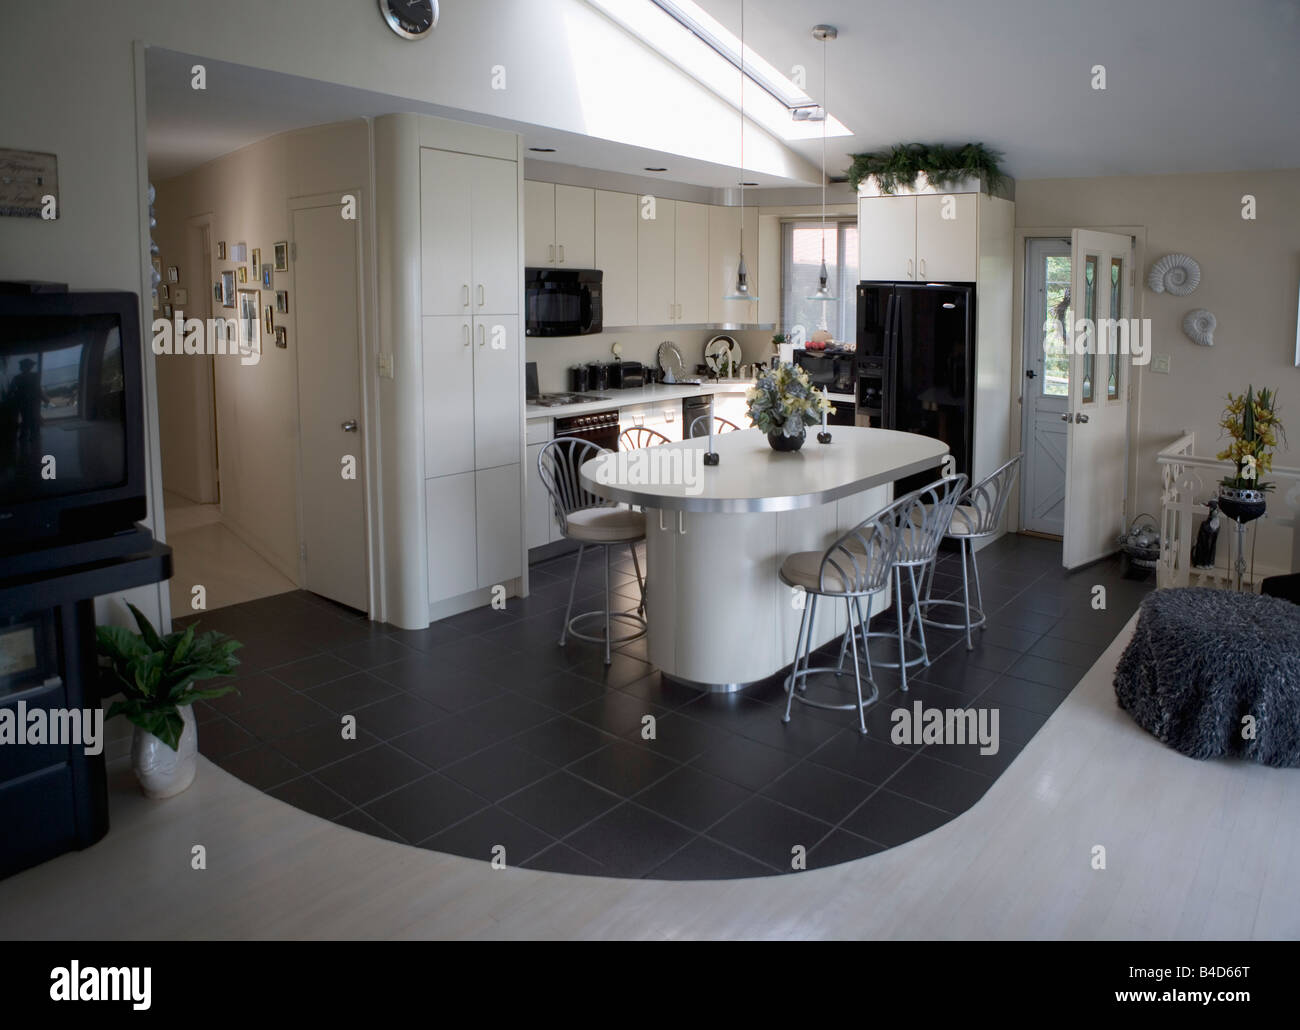 kitchen, dining, cooking, island, modern, contemporary, cabinets, house, home Stock Photo